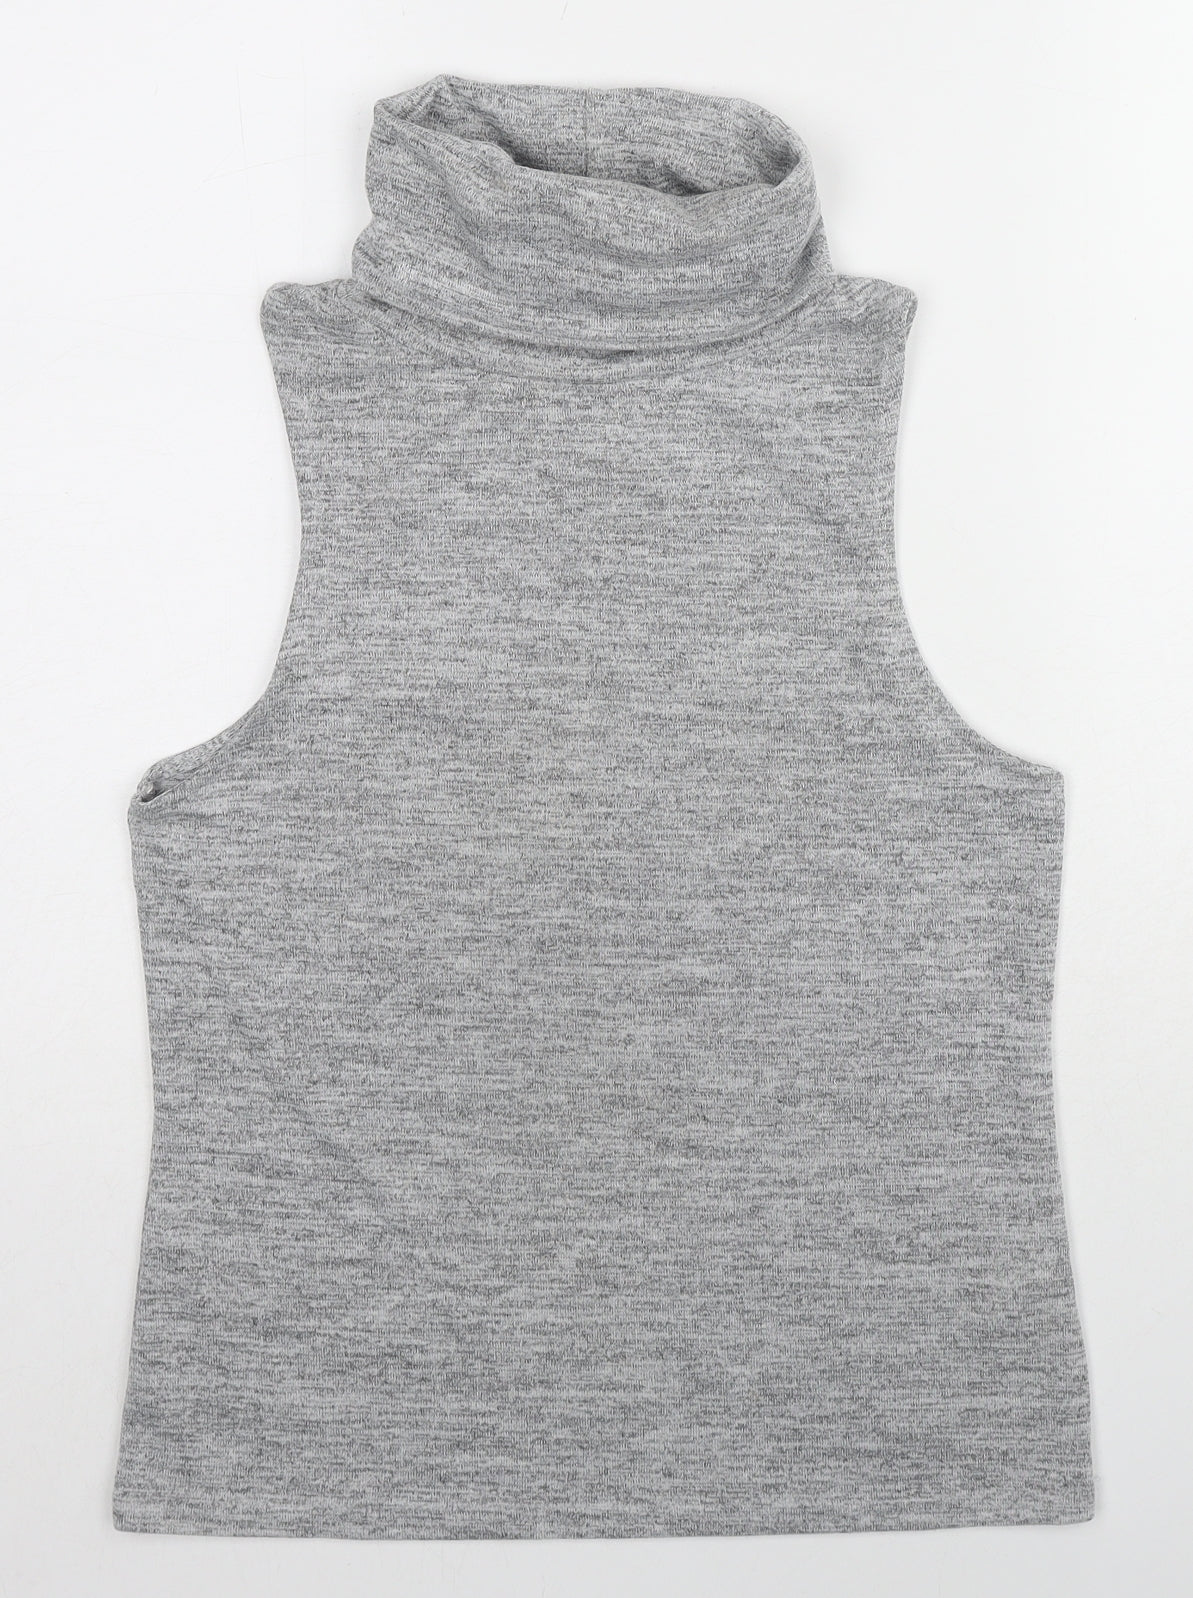 New Look Womens Grey Polyester Basic Tank Size 12 Roll Neck